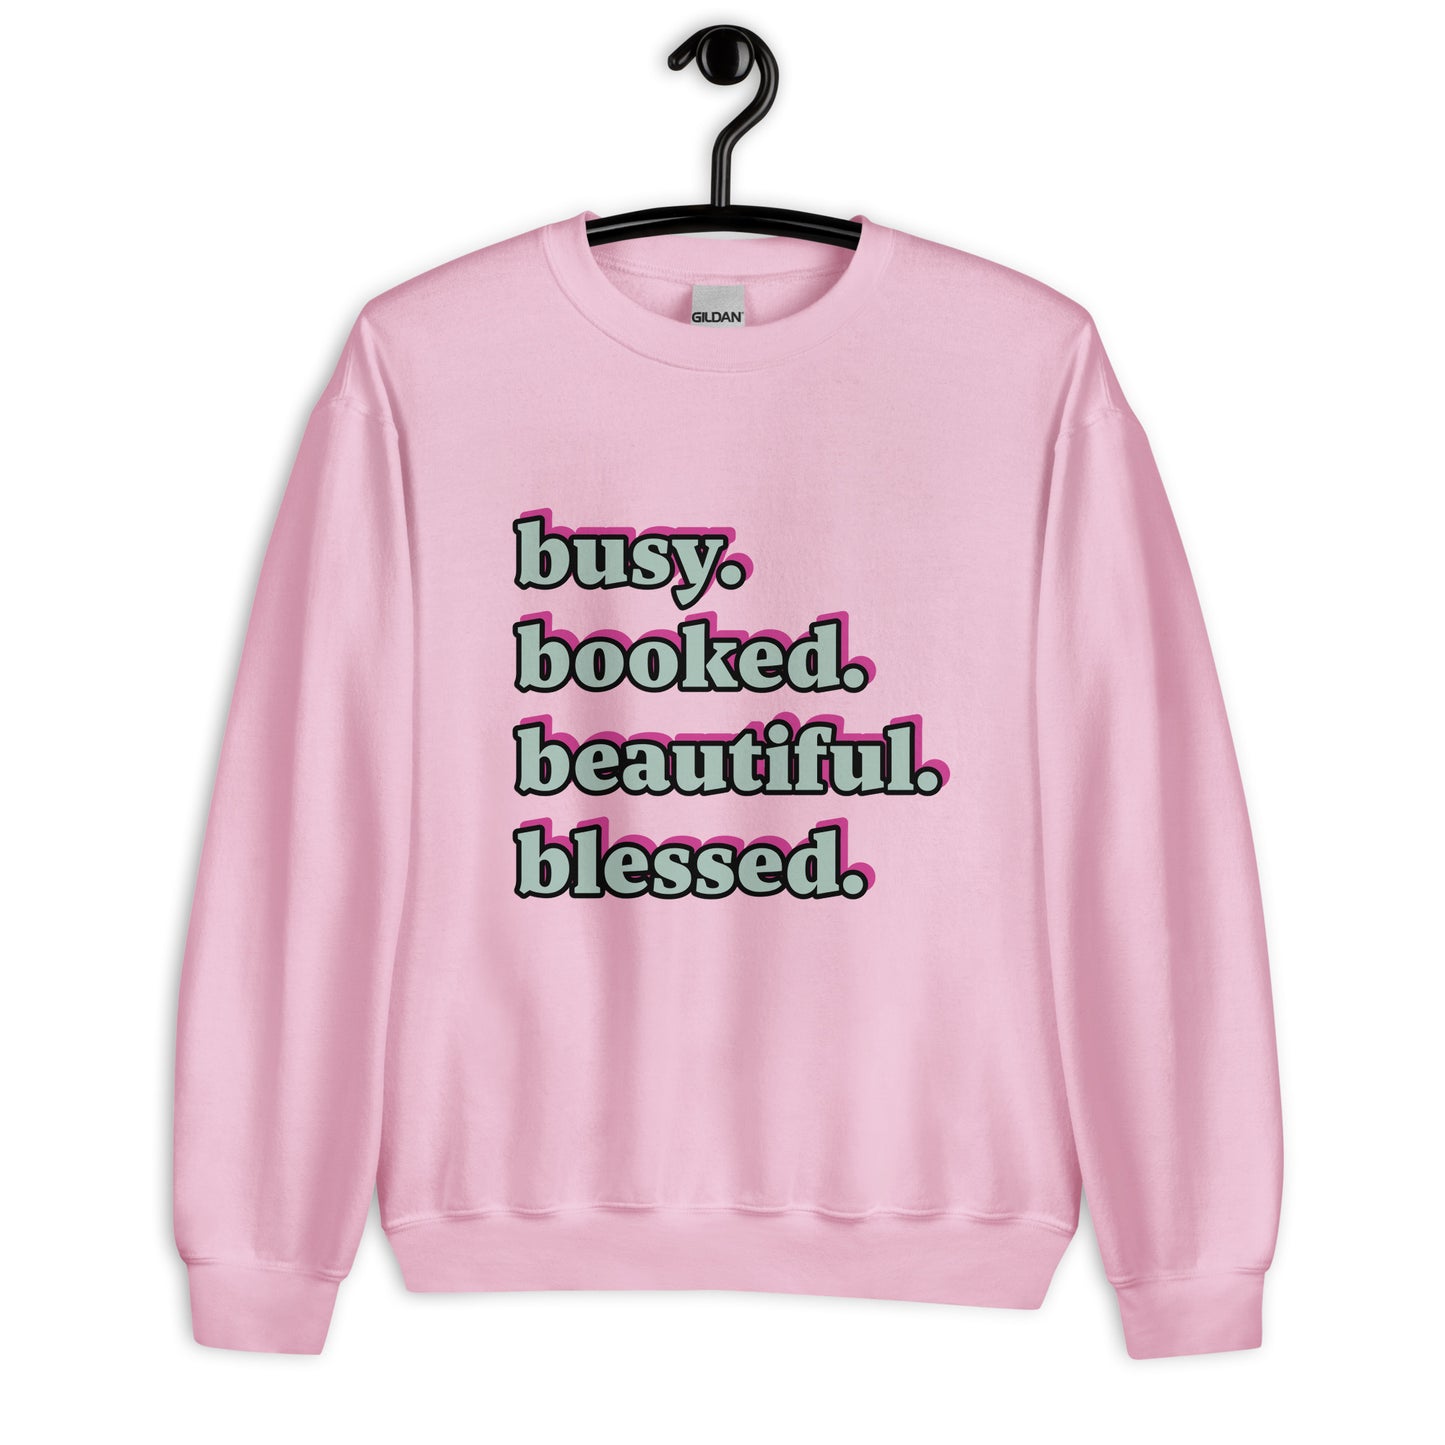 Booked & Blessed Sweatshirt 😇